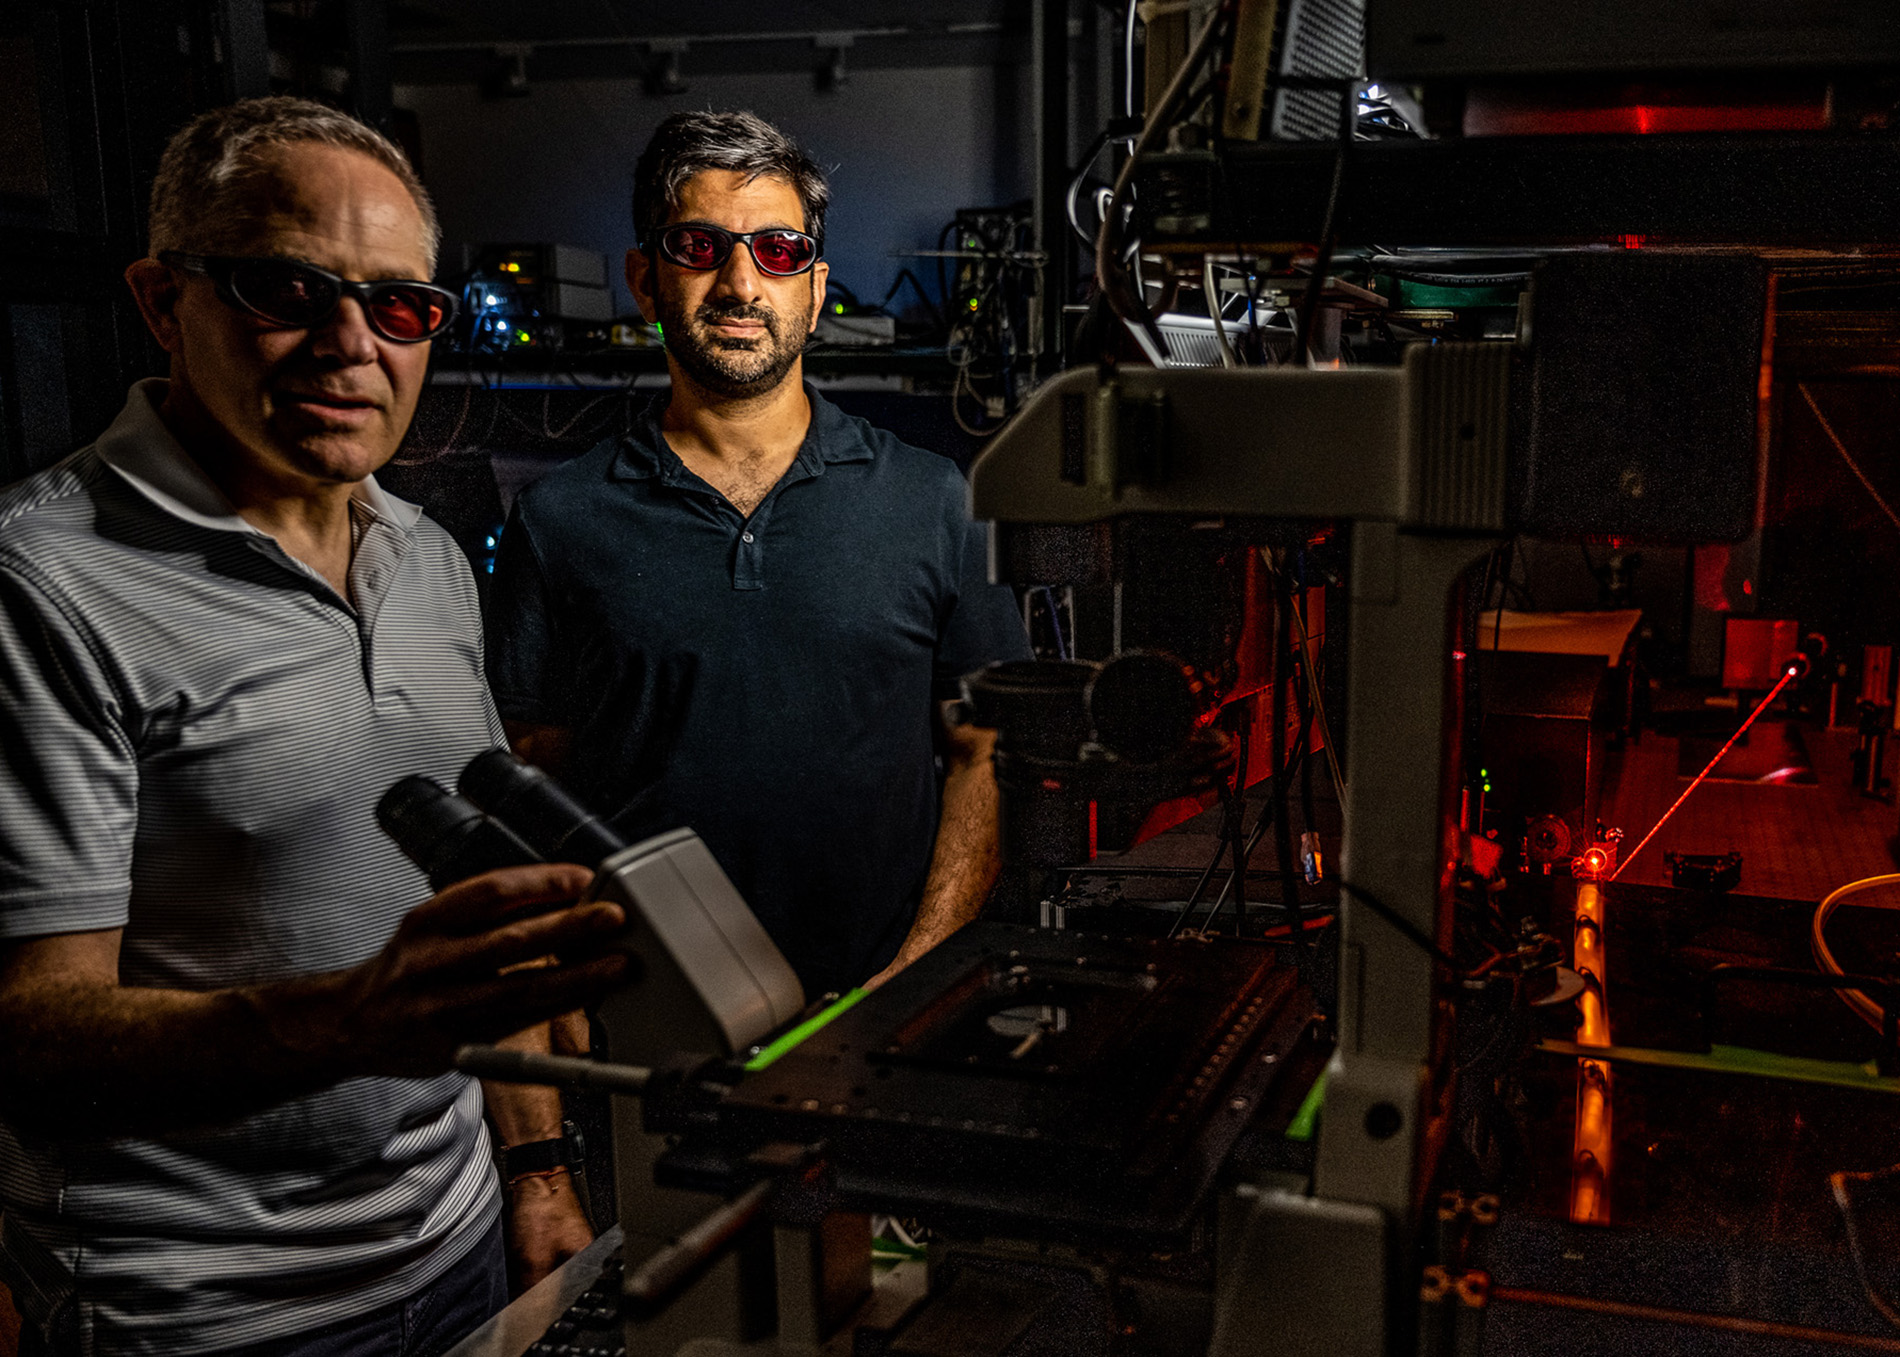 MSU researchers Marcos Dantus (left) and Elad Harel (right) are using ultrafast laser pulses to create a new type of microscope. Credit: Derrick L. Turner